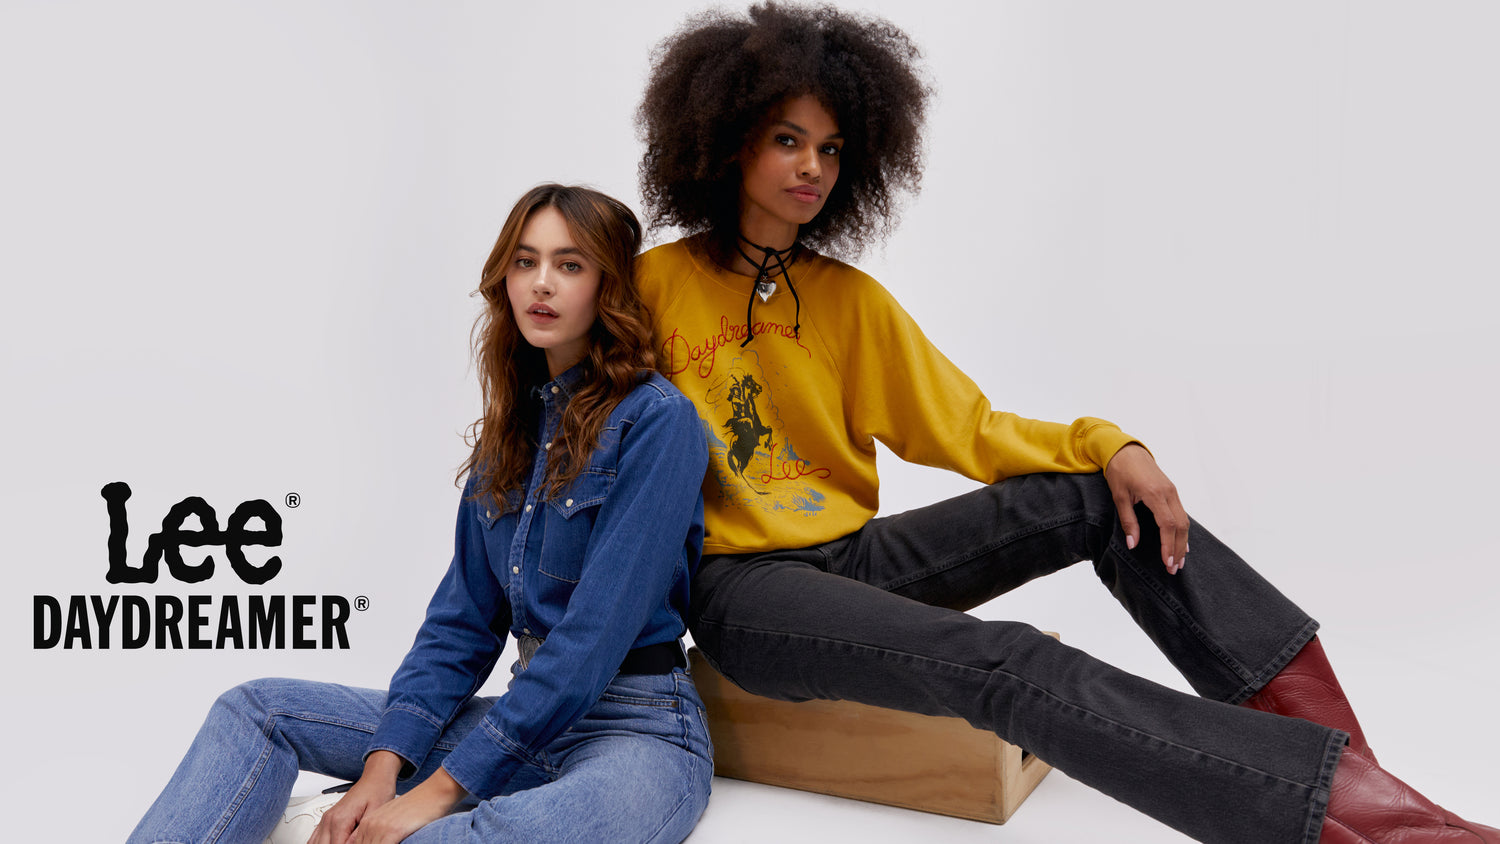 two models sitting - one wearing a denim butotn up shirt and the other in black jeans and a marigold crewneck